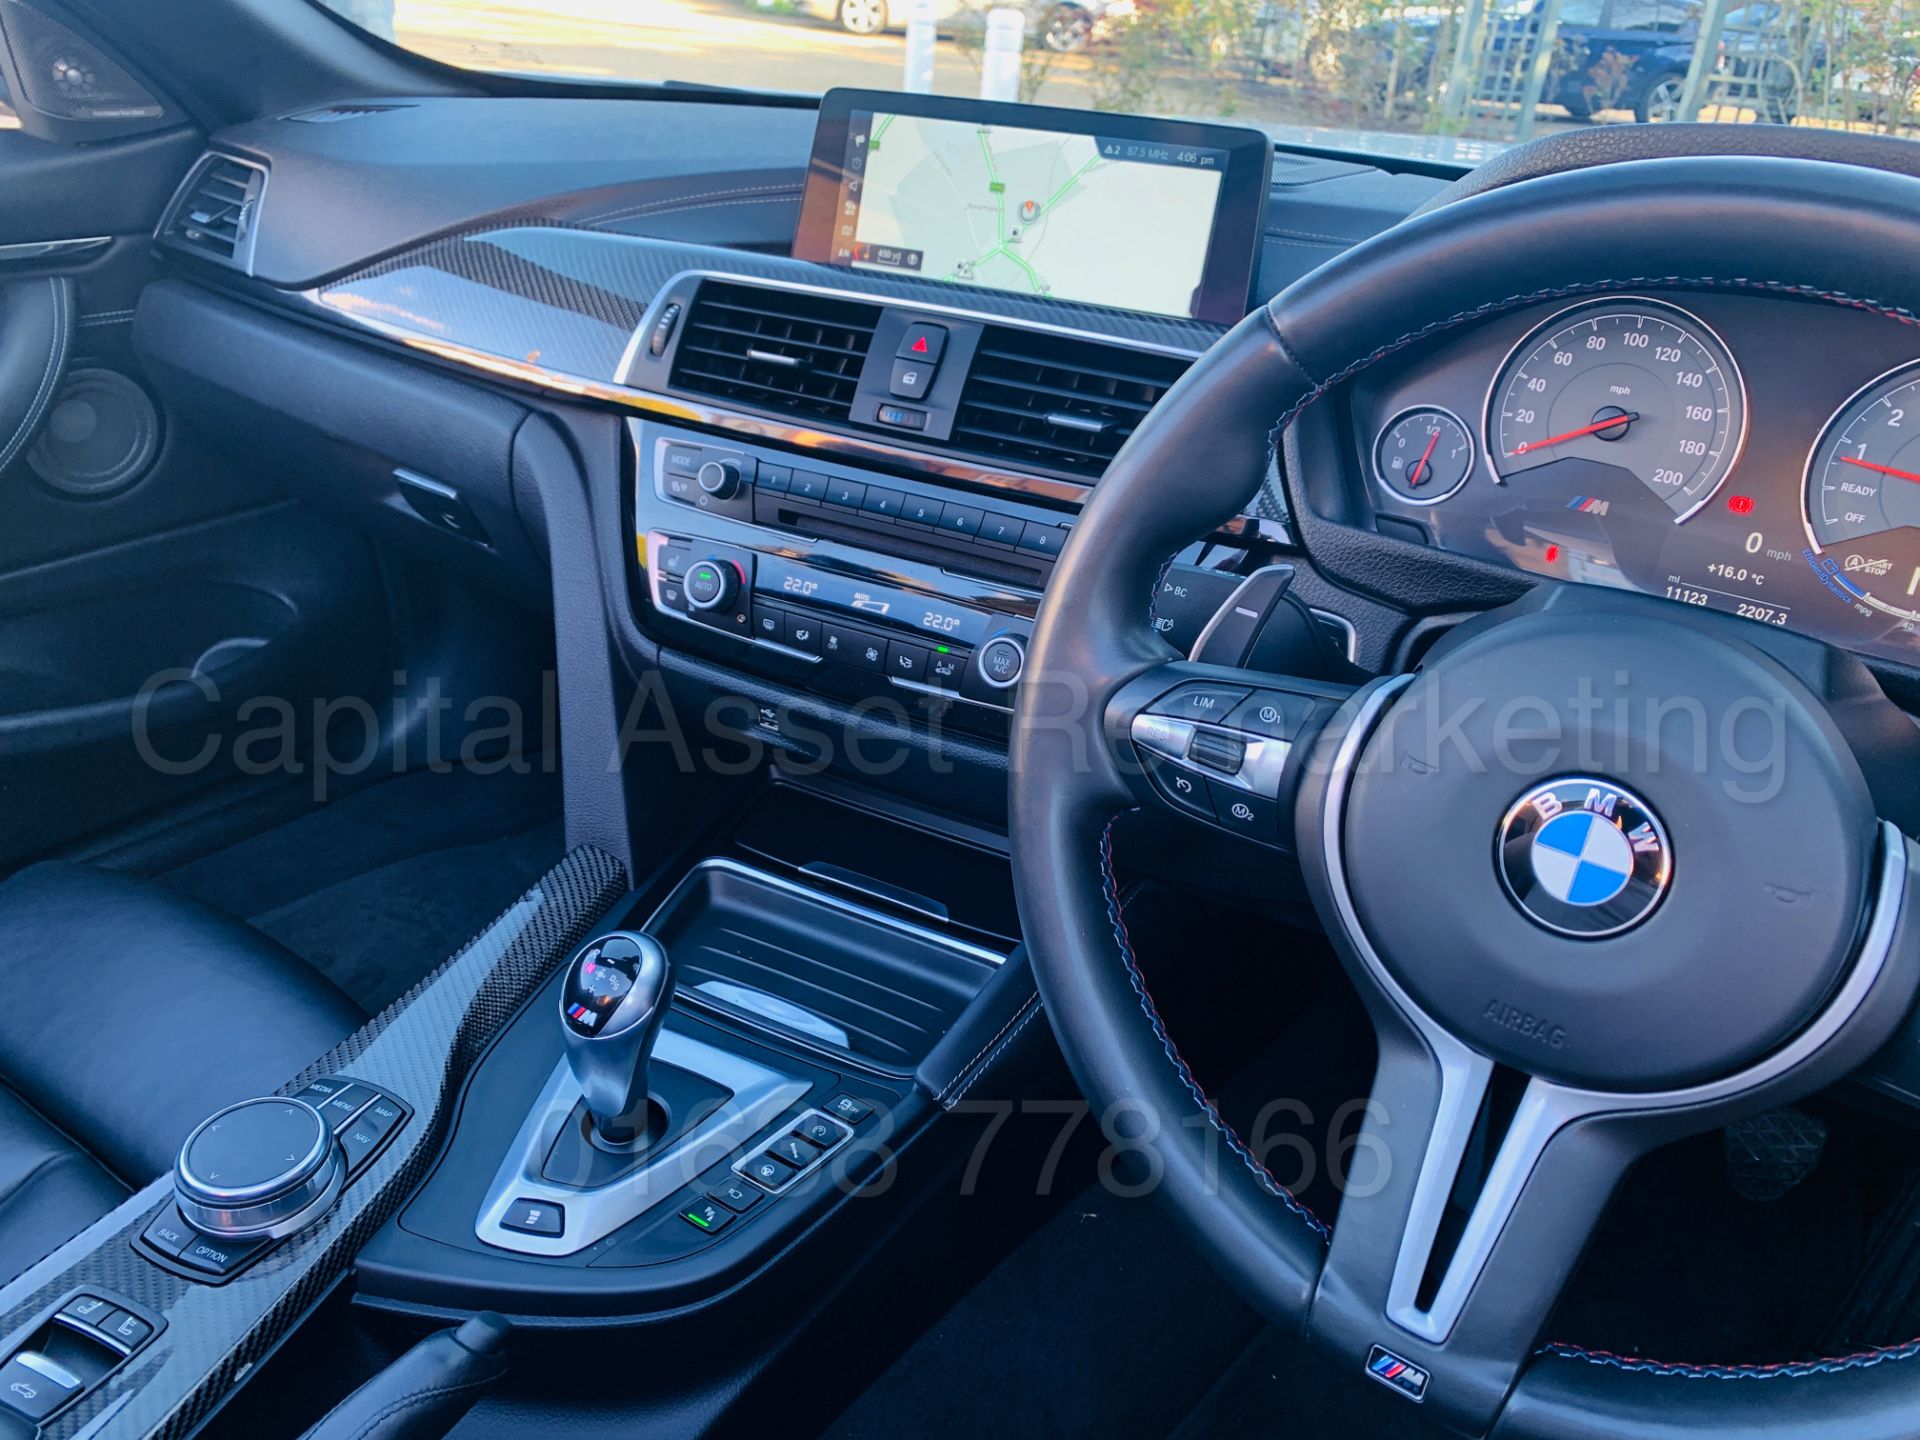 ON SALE BMW M4 CONVERTIBLE *COMPETITION PACKAGE* (2018 MODEL) '431 BHP - M DCT AUTO' WOW!!!!! - Image 67 of 89